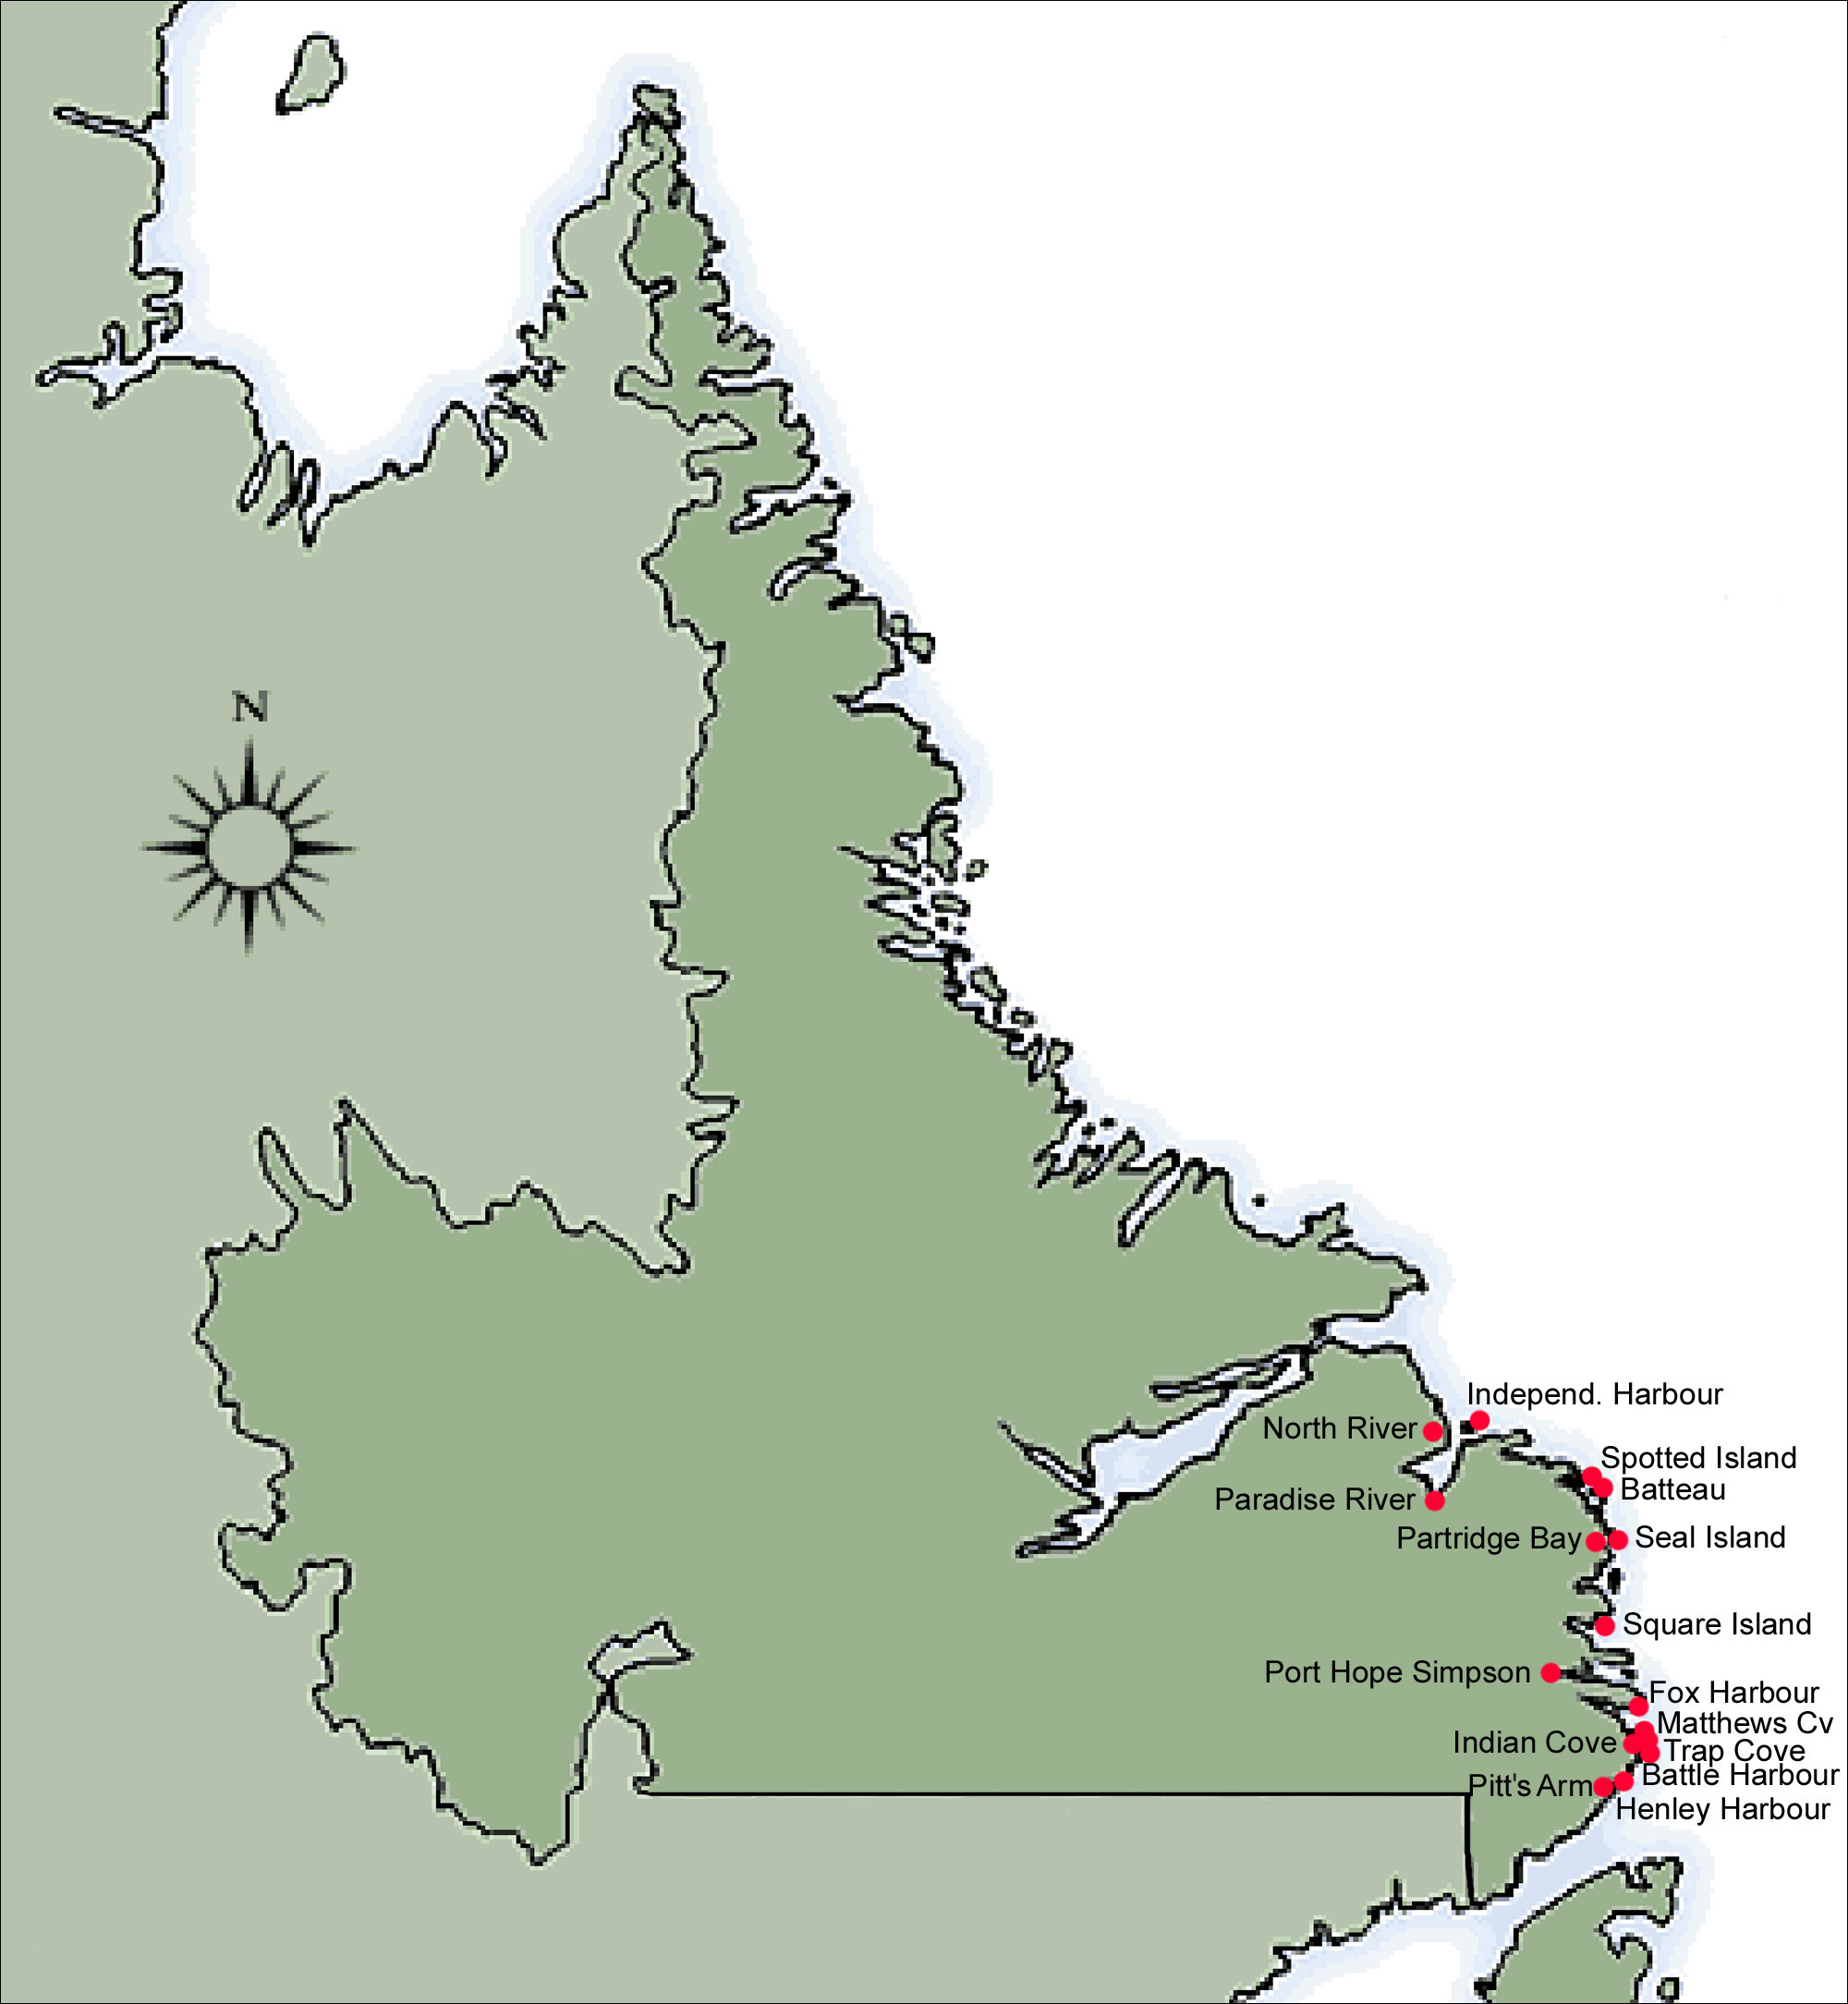 Labrador Communities Affected by Resettlement 1965-1975 (Click to go back)